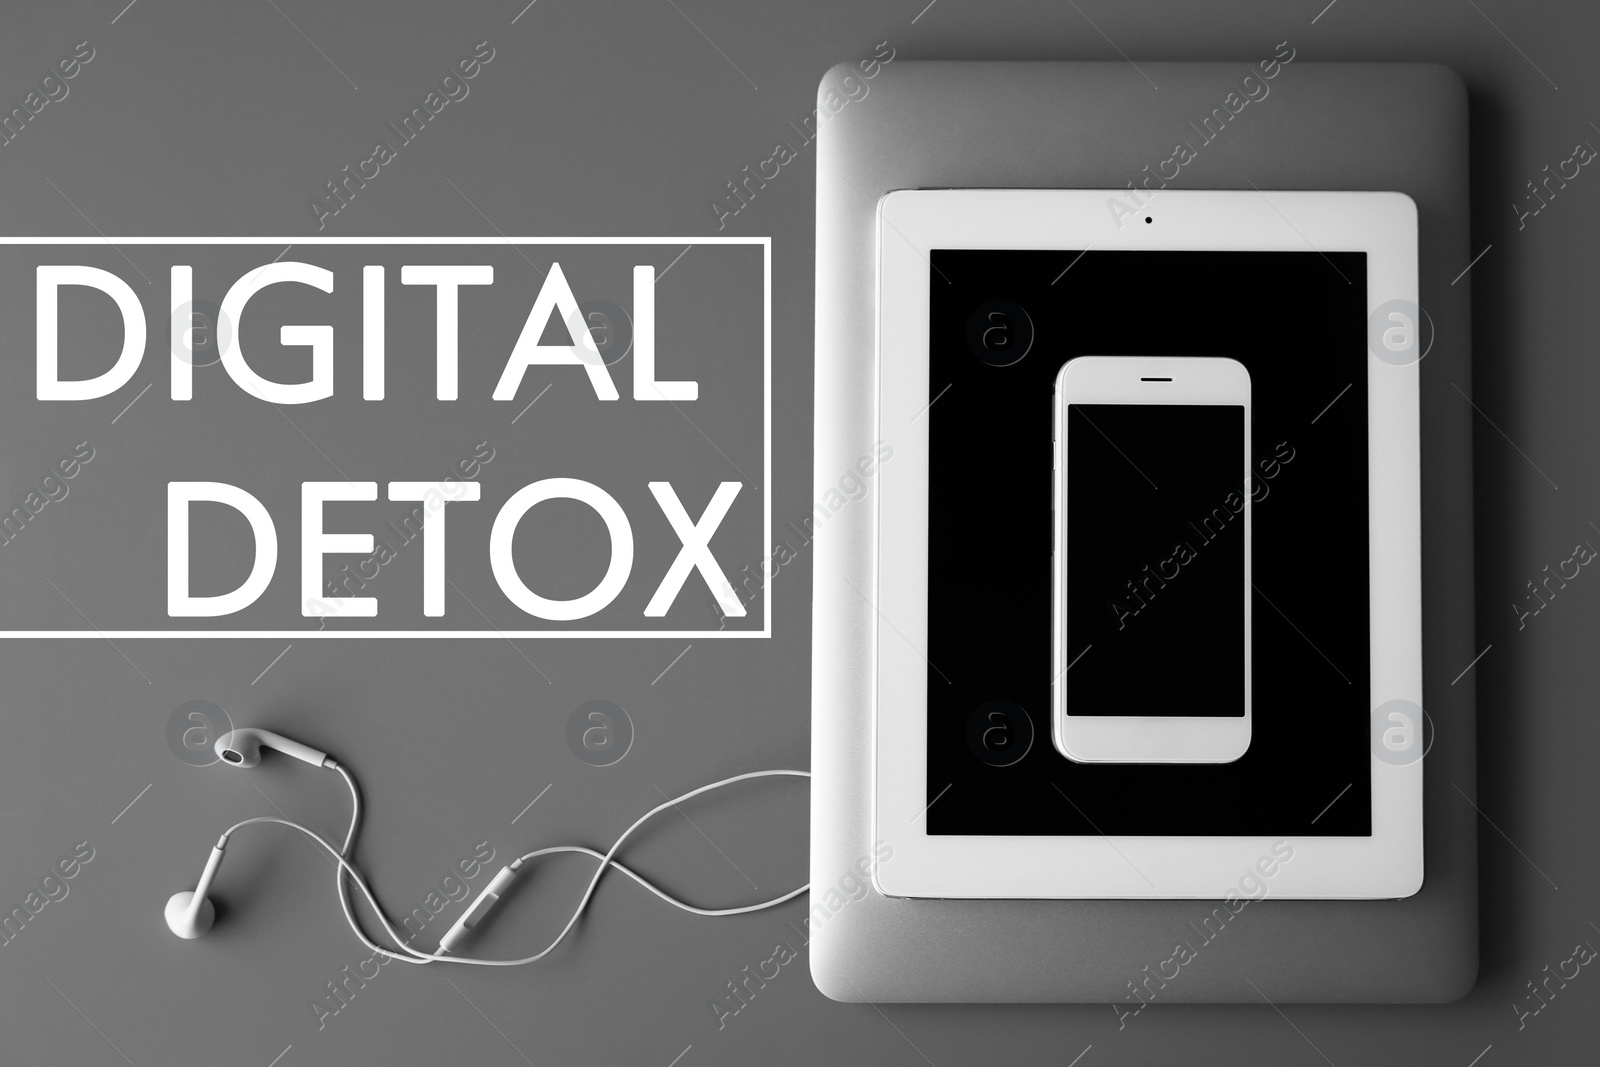 Image of Text Digital detox and devices on grey background, top view